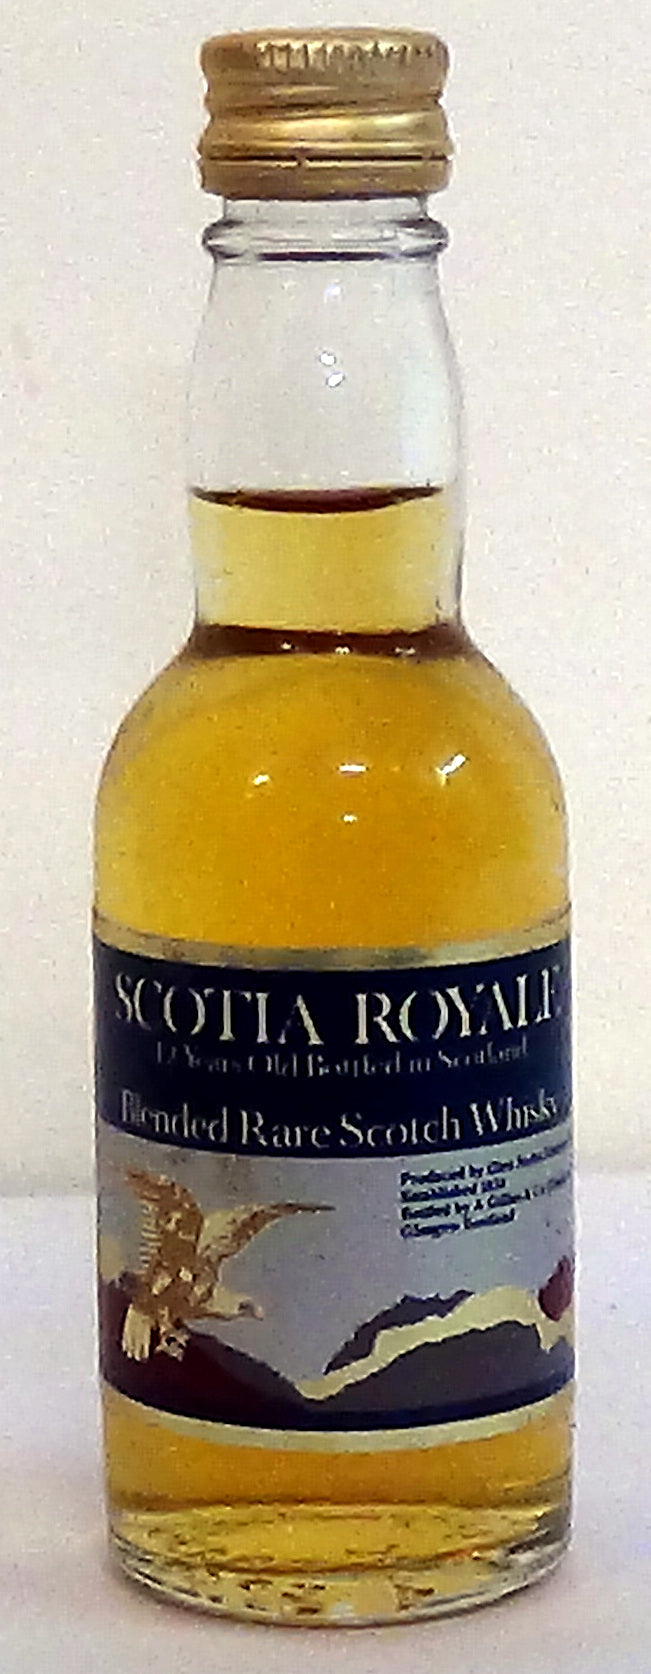 1980 Scotia Royale 12 Year Old Blended Rare Scotch Whisky 5cl